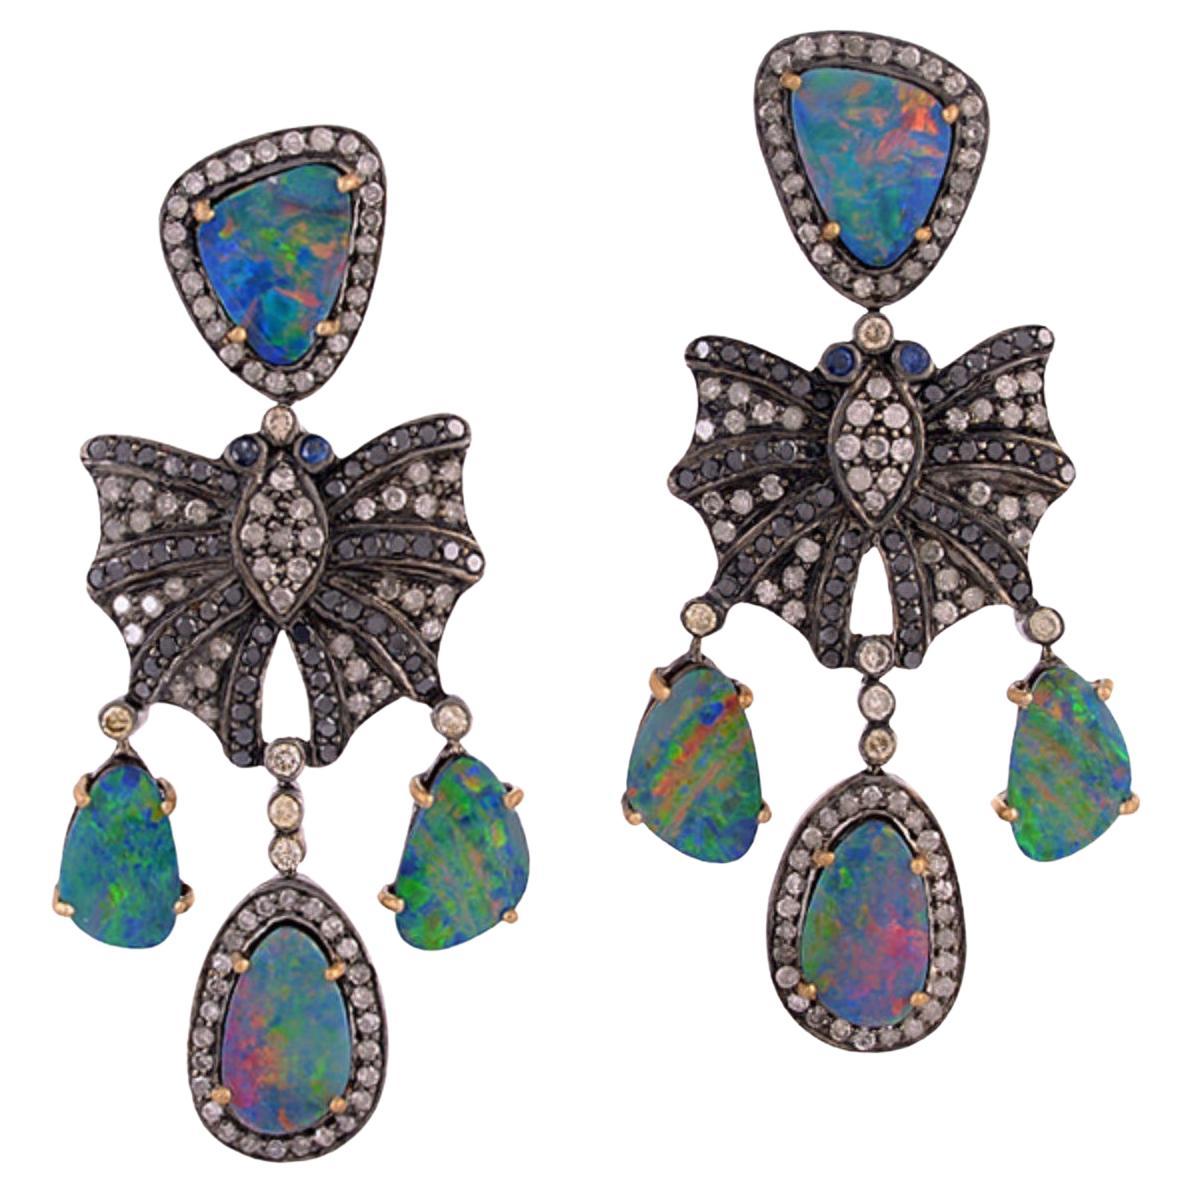 Multi Color Opal Doublet & Blue Sapphire Earrings with Pave Diamonds